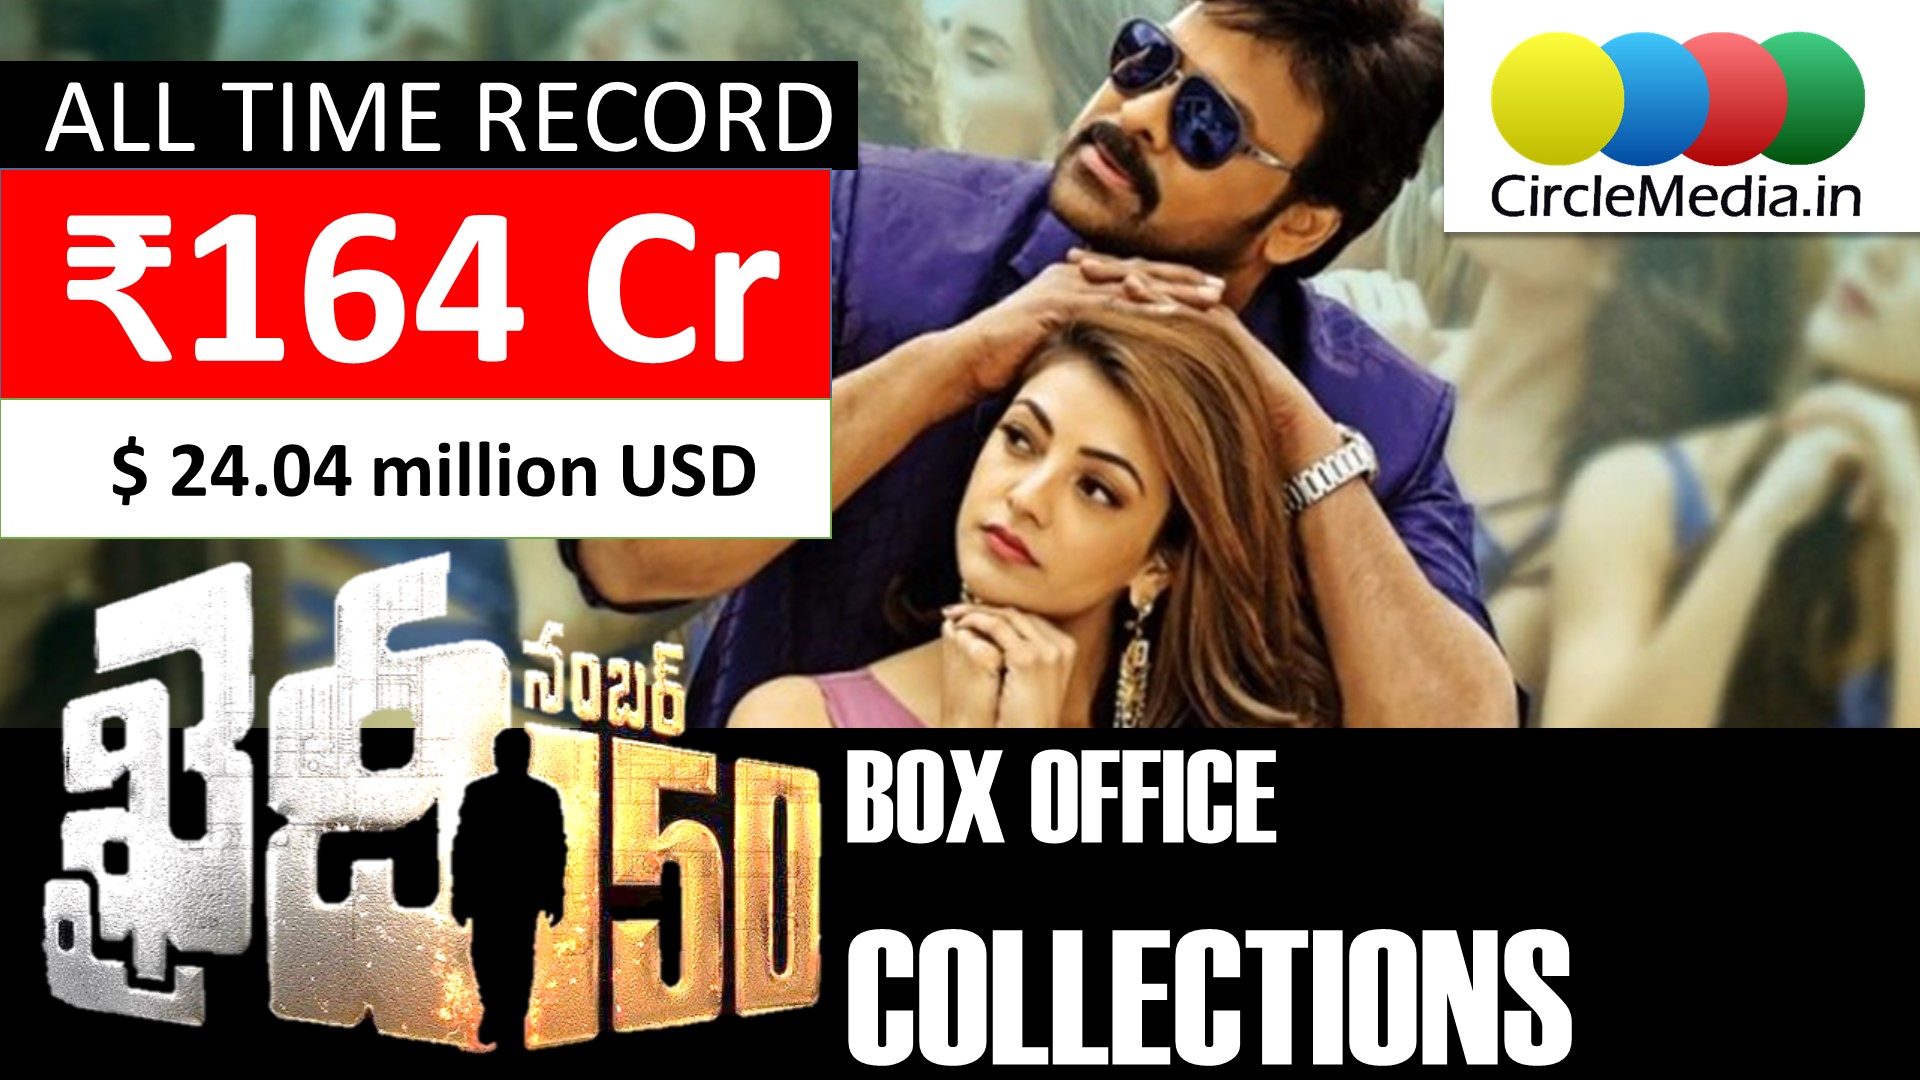 Khaidi No 150 All Time Film Industry Record Collections | Rs 164 crore worldwide